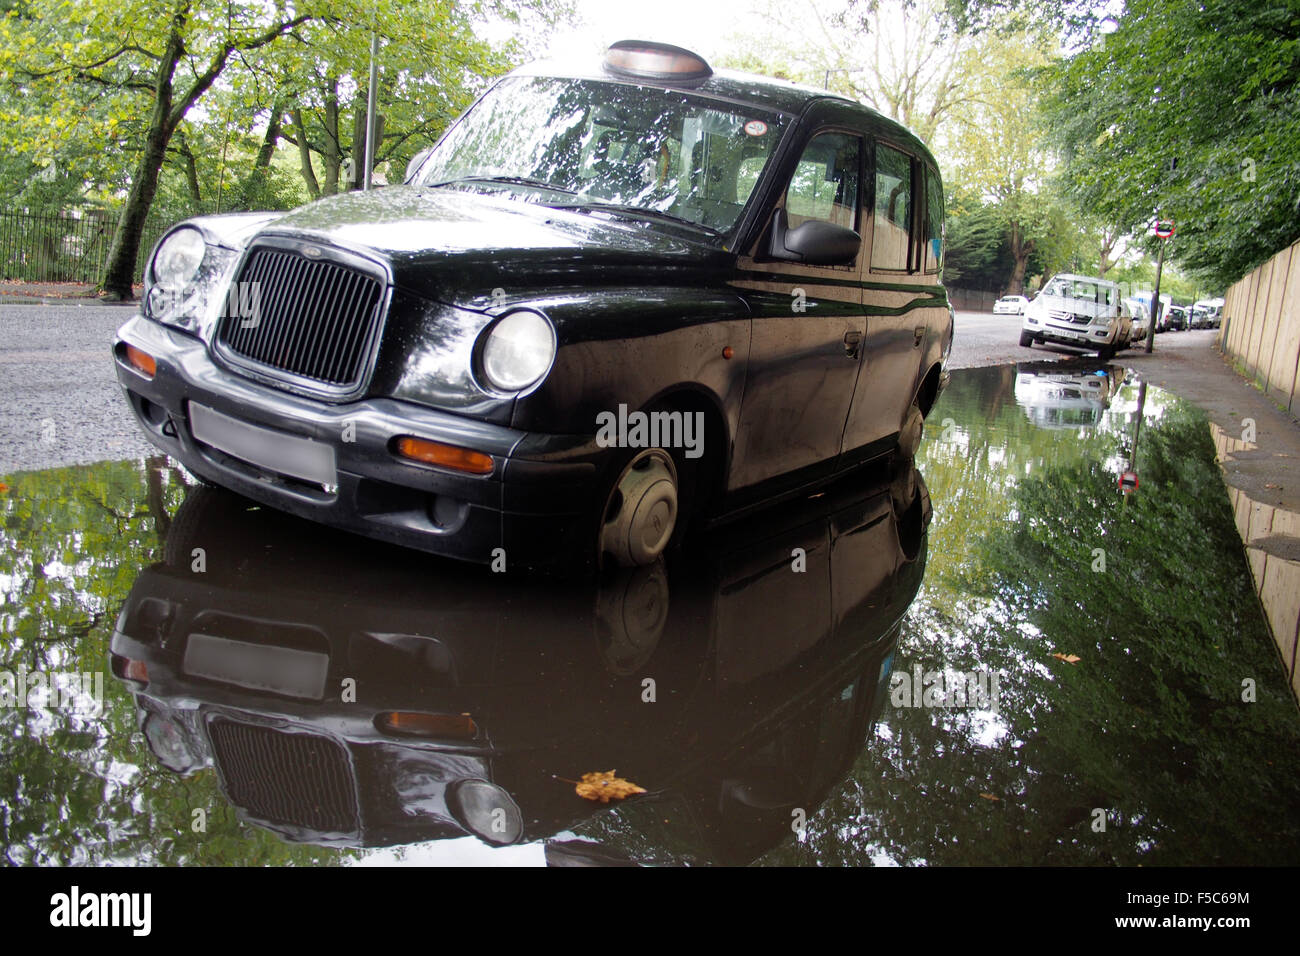 black cab taxi in puddle or rain water on london road england uk Stock Photo